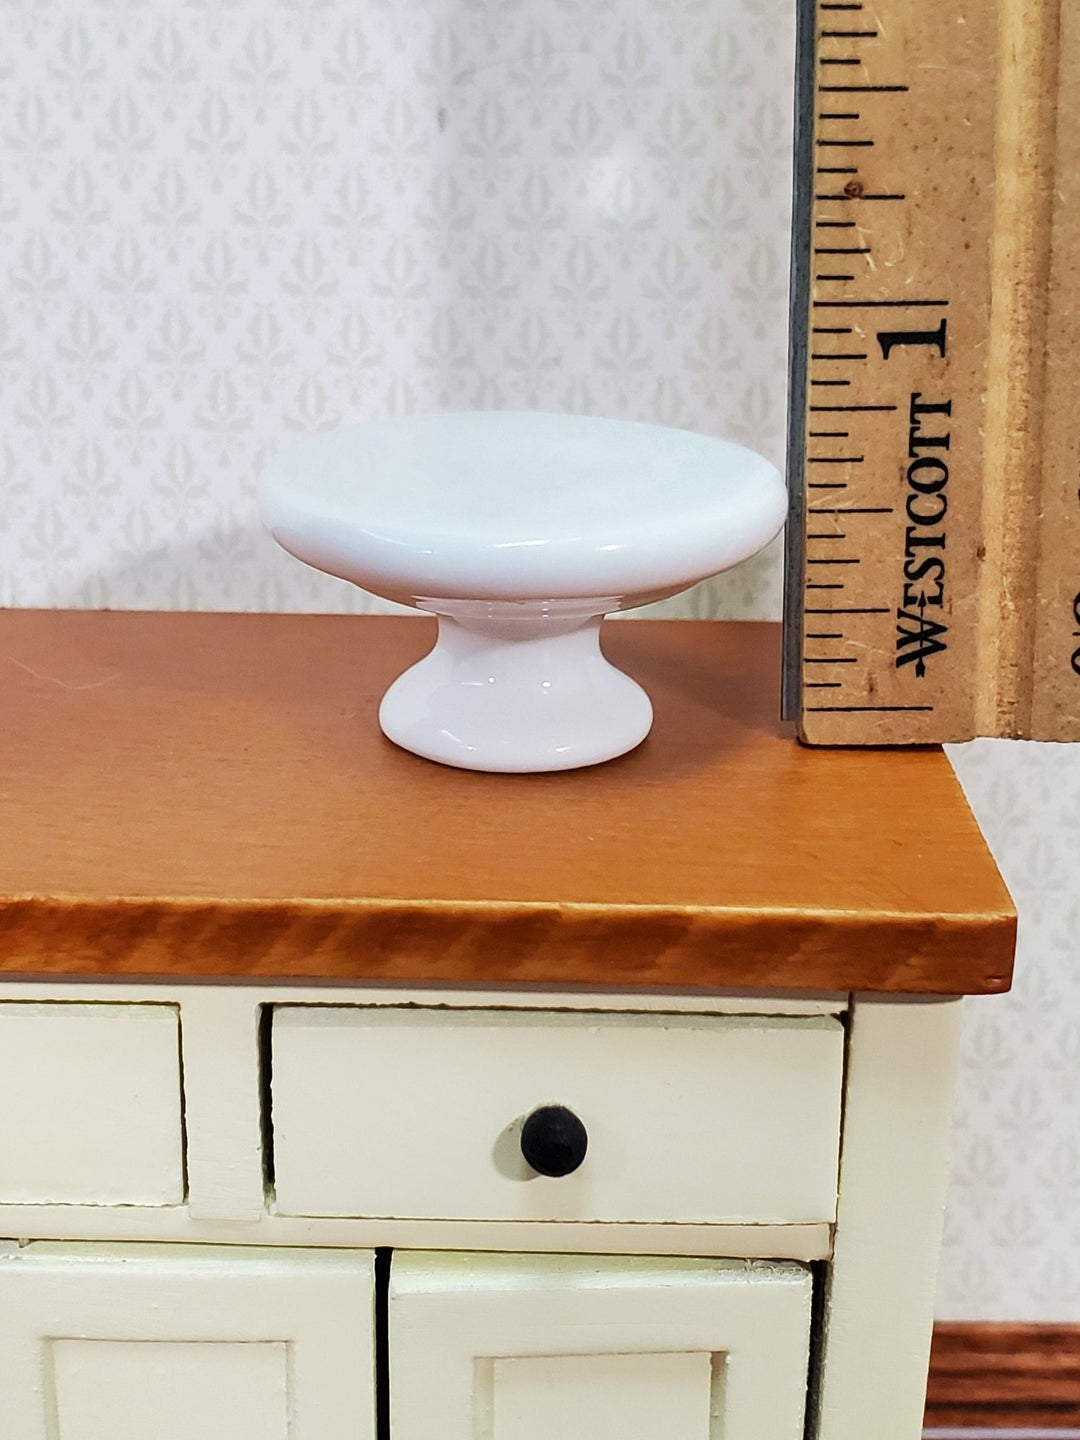 Dollhouse Cake Stand Platter All White Ceramic 1:12 Scale Miniatures Dishes - Miniature Crush